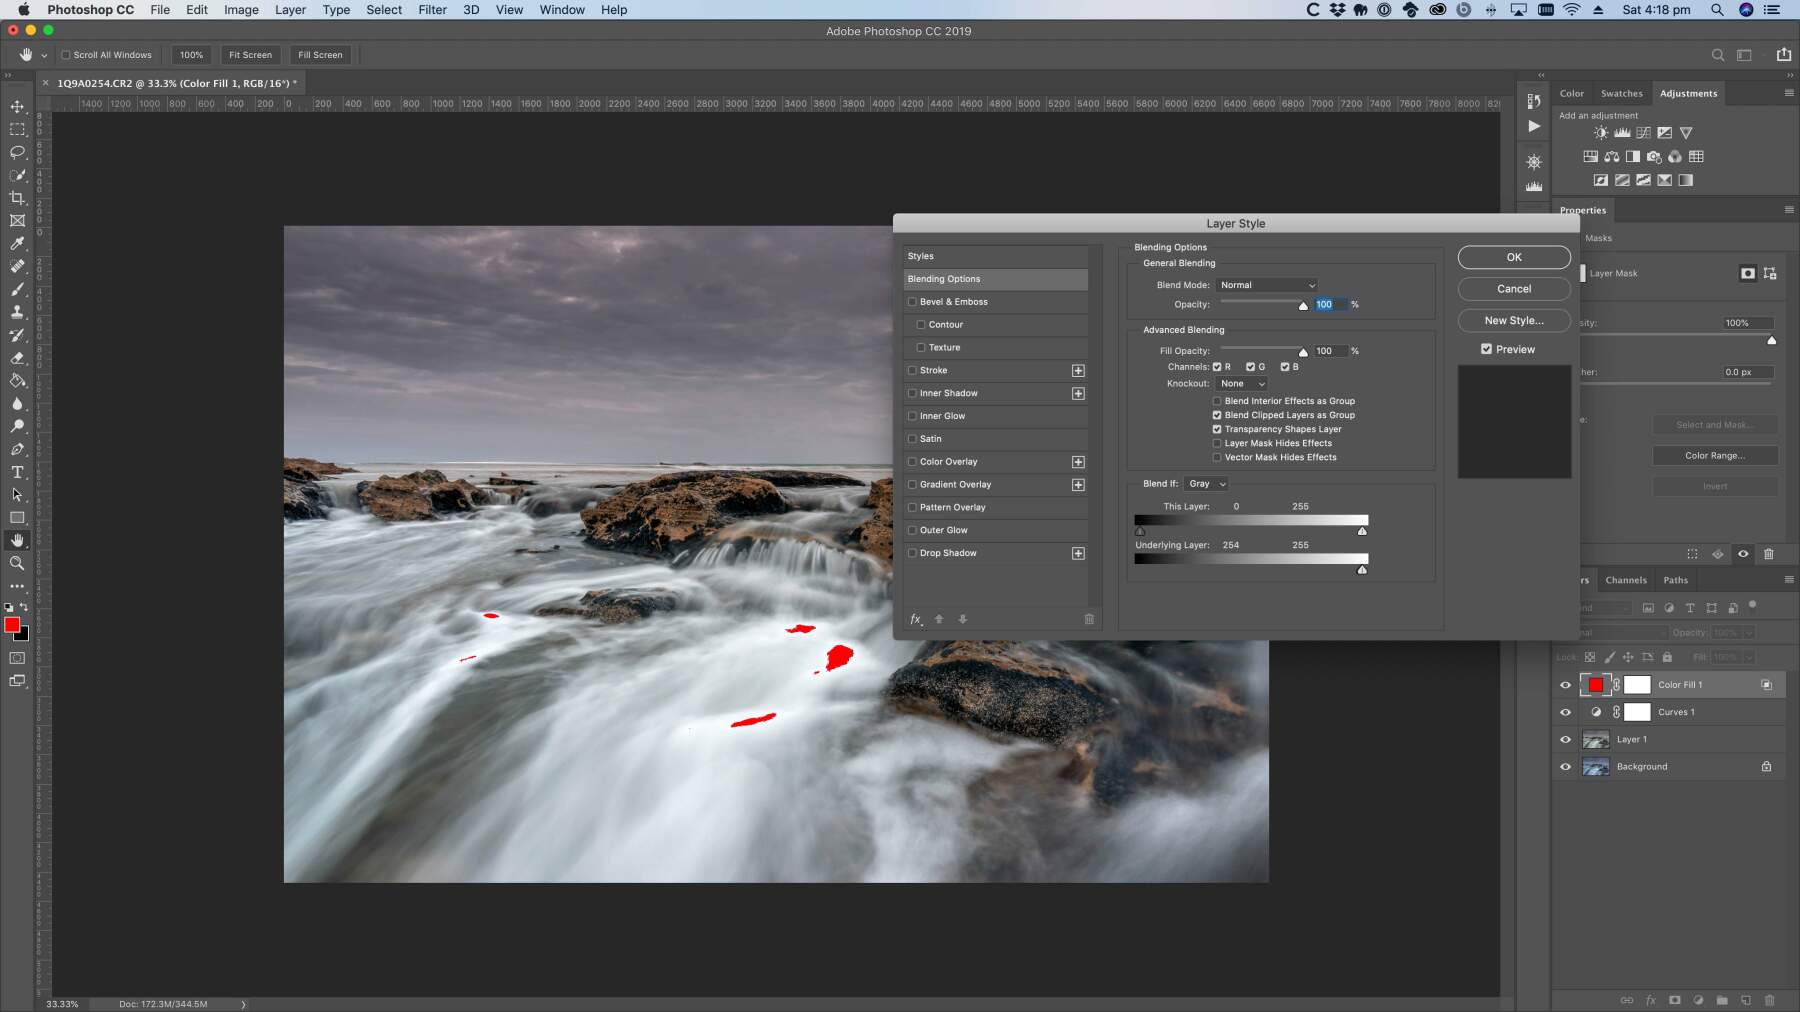 How to show real-time highlights and shadows clipping in Photoshop